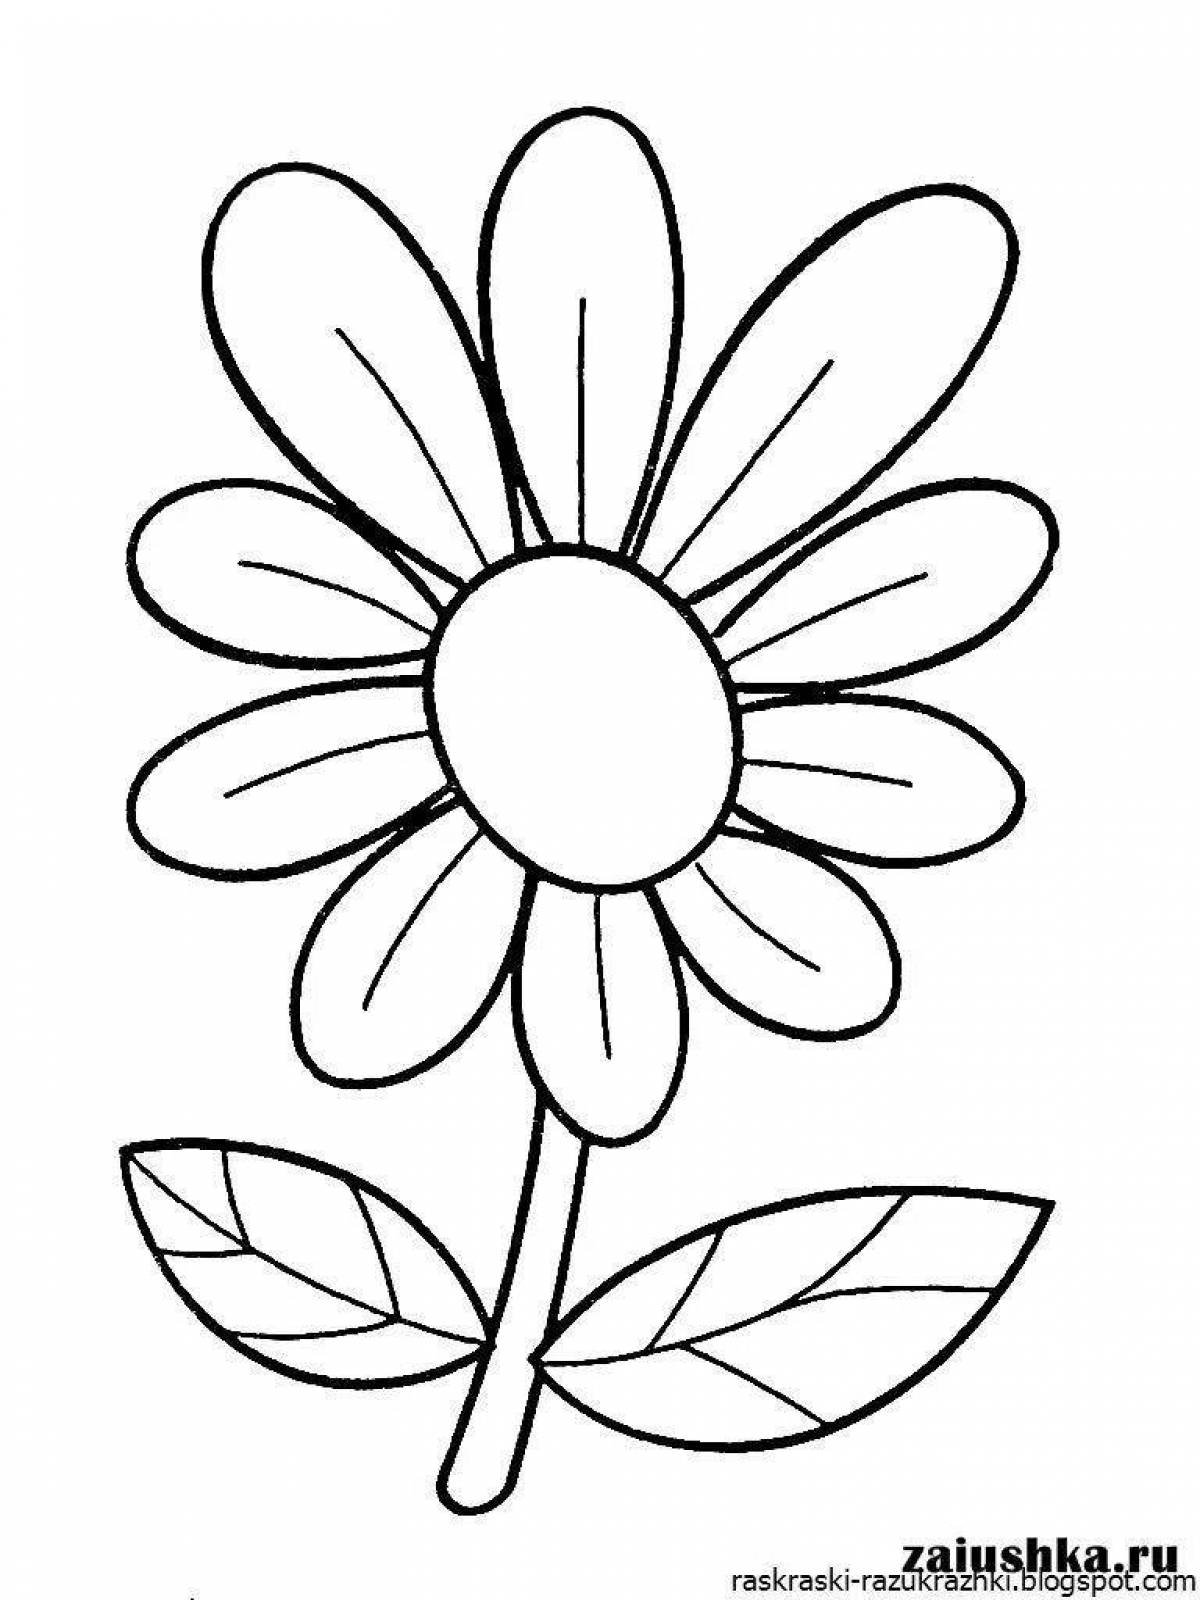 Charming chamomile coloring book